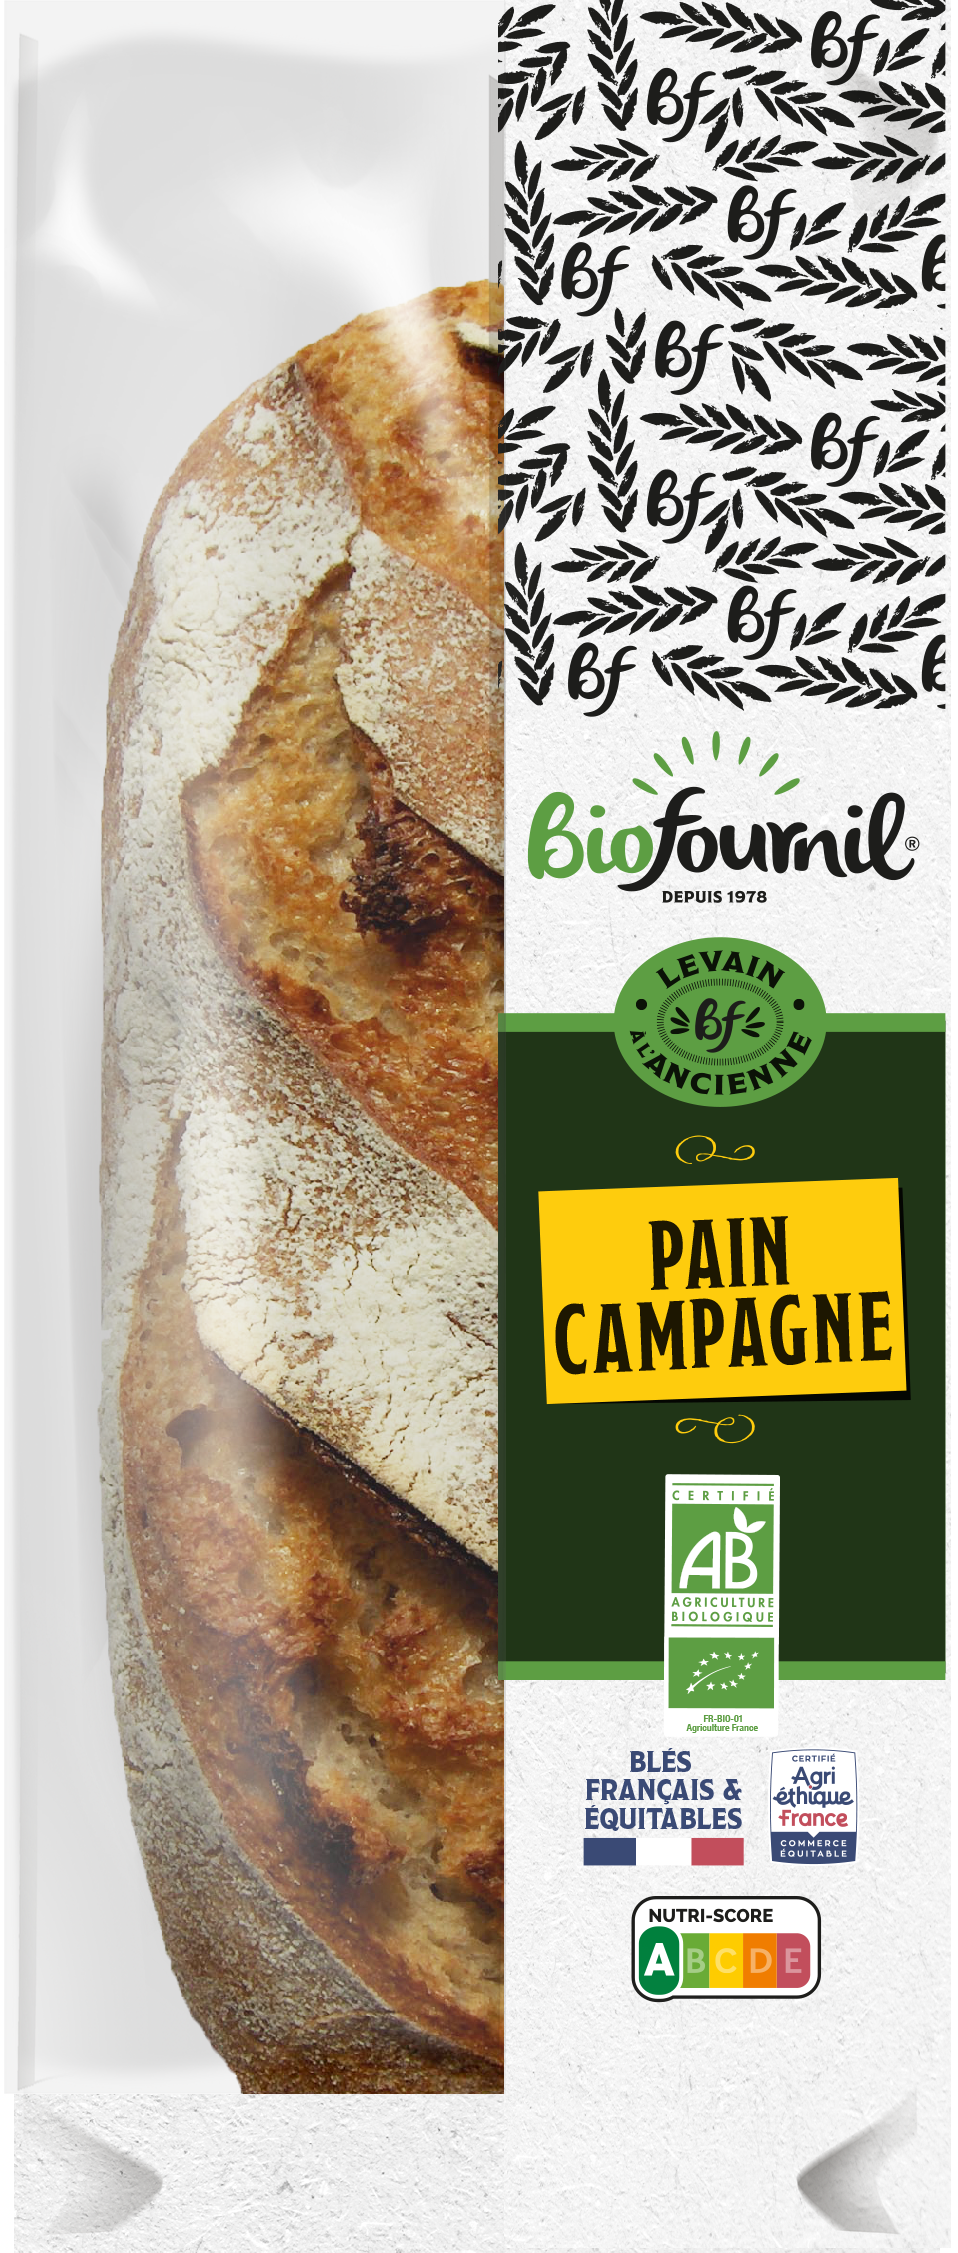 PACK_PAIN CAMPAGNE